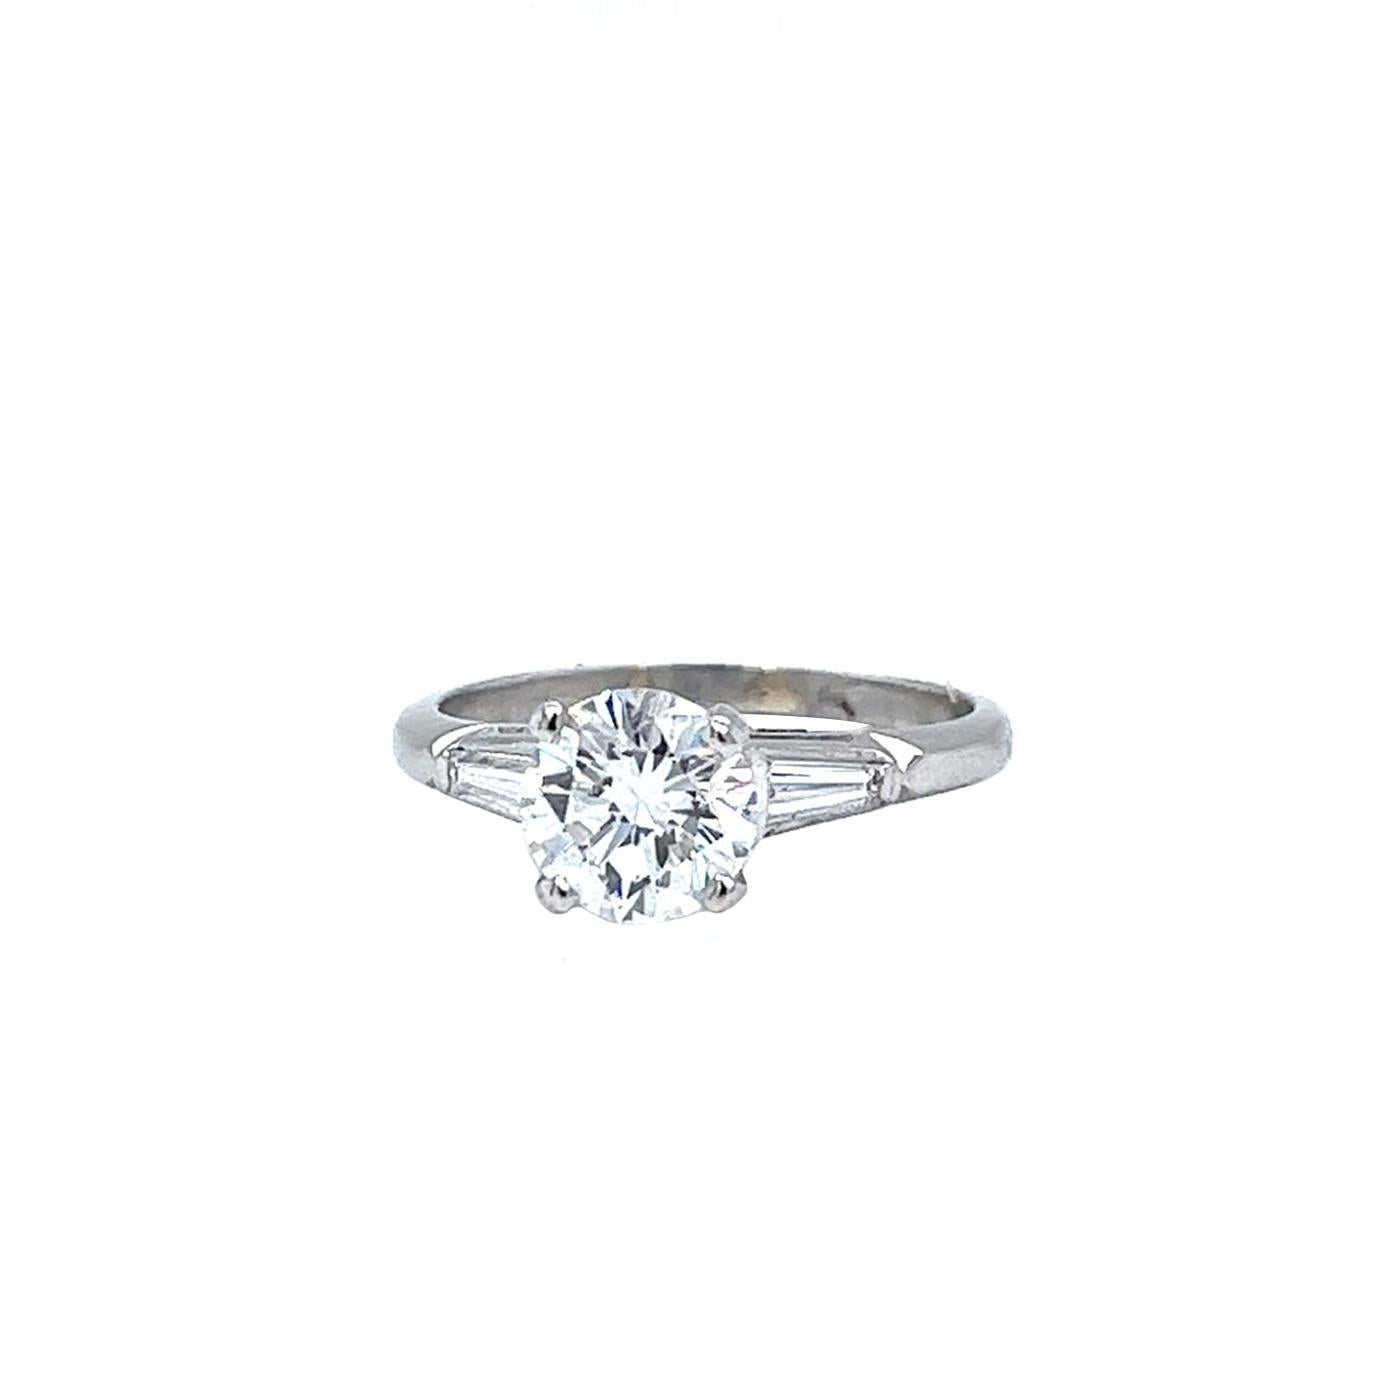 A Lovely Charming Natural Diamond Engagement Ring Showcasing a 1.64 Carat Round Brilliant Cut Diamond, E Color, and VS1 in Clarity with 0.45ct Side Baguettes Diamonds Features F Color, and VS1 Clarity, Finely Made with 14K White Gold. Size 6.5 Is